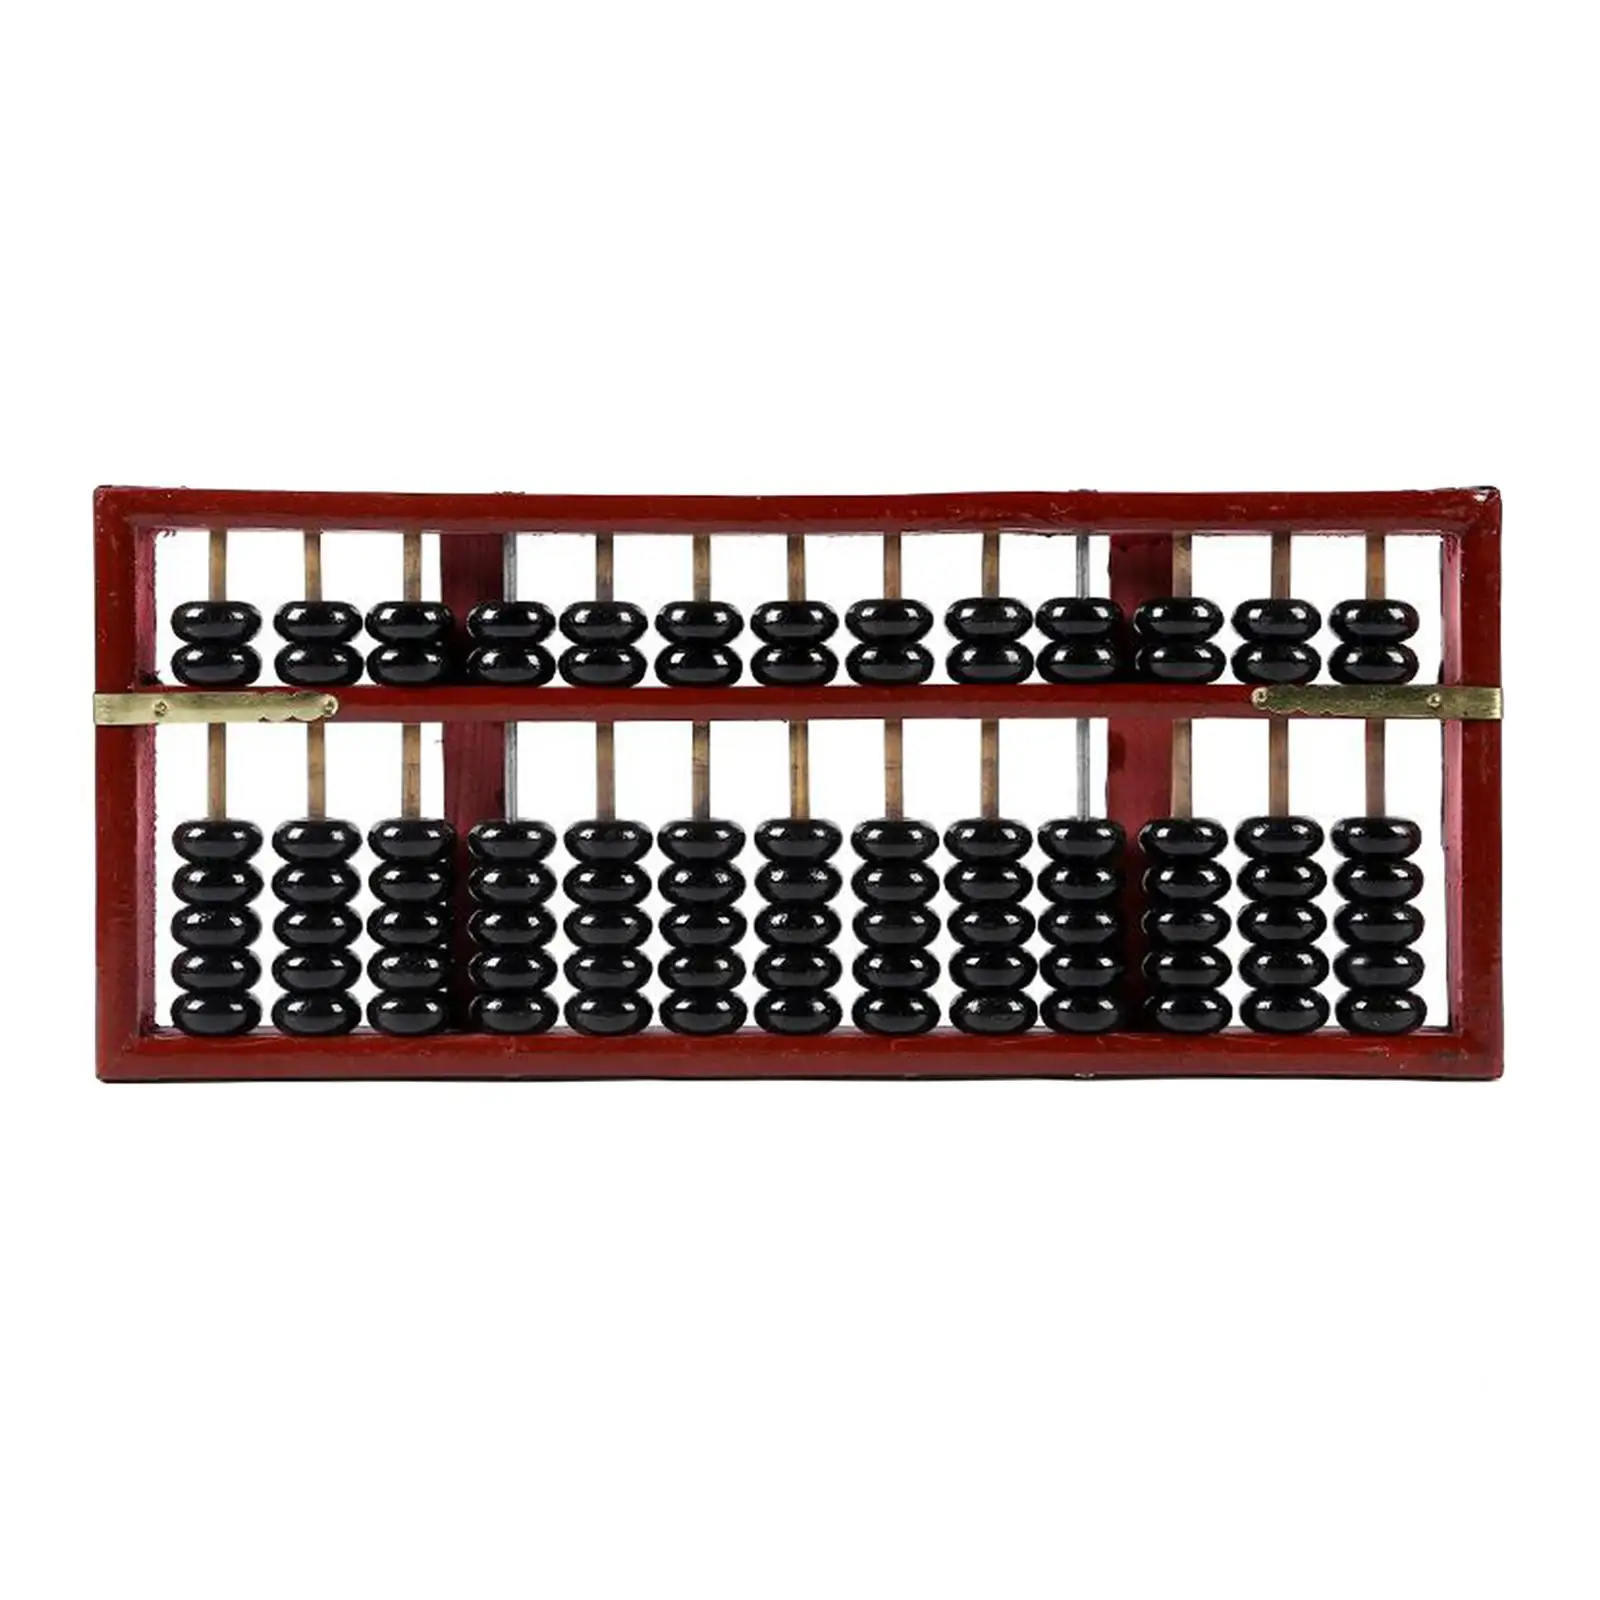 13/15/1 Standard Abacus-Professional 13/15/17 Column Calculator (Functional And Educational Learning Tool)